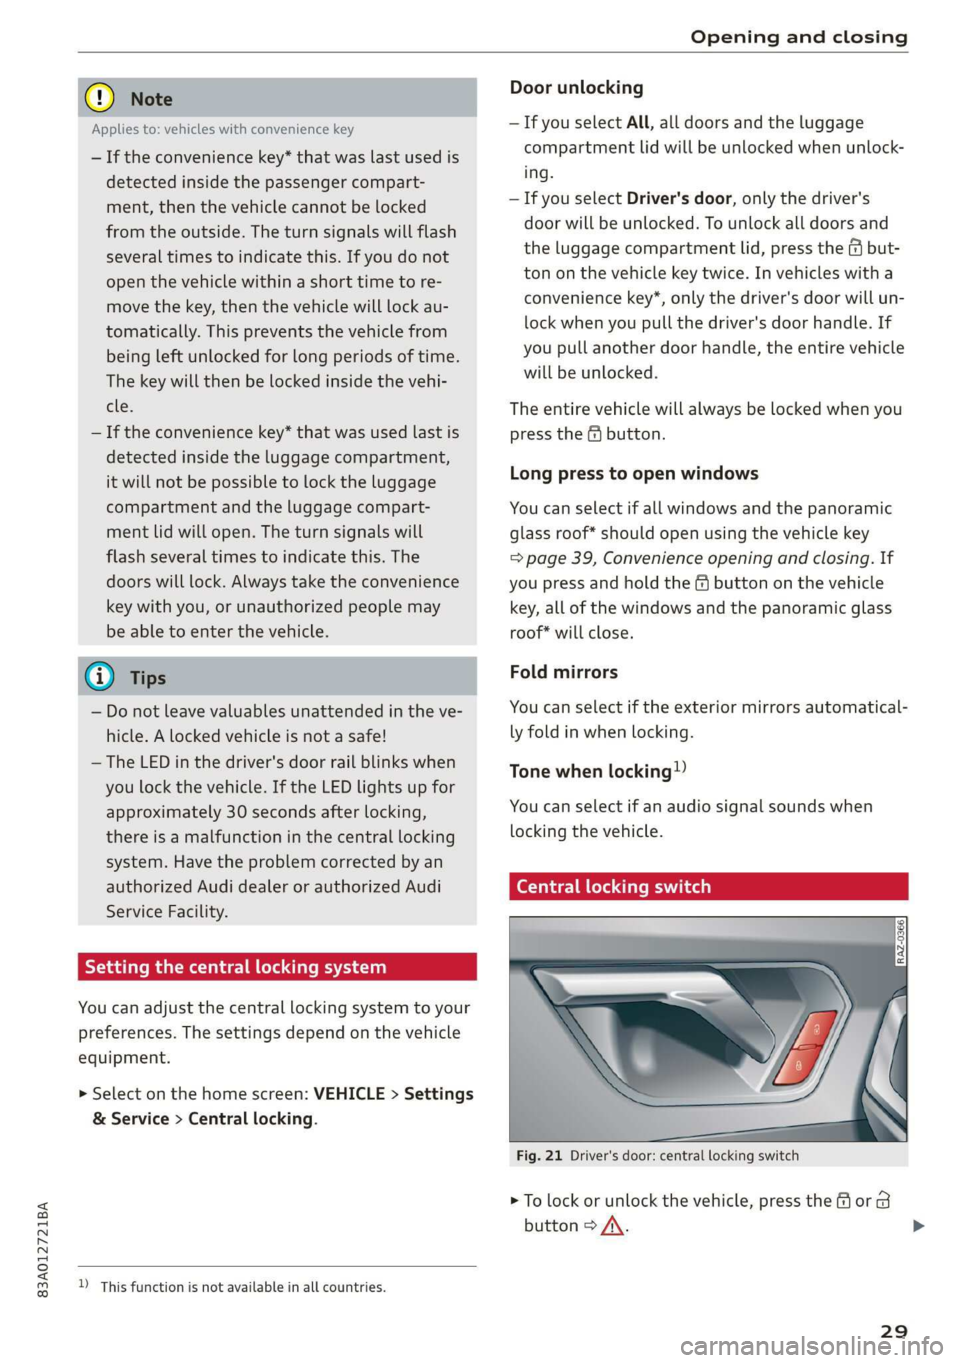 AUDI Q3 2019  Owners Manual 83A012721BA 
Opening and closing 
  
© Note 
Door unlocking 
—If you select All, all doors and the luggage 
compartment lid will be unlocked when unlock- 
ing. 
— If you select Driver's door,